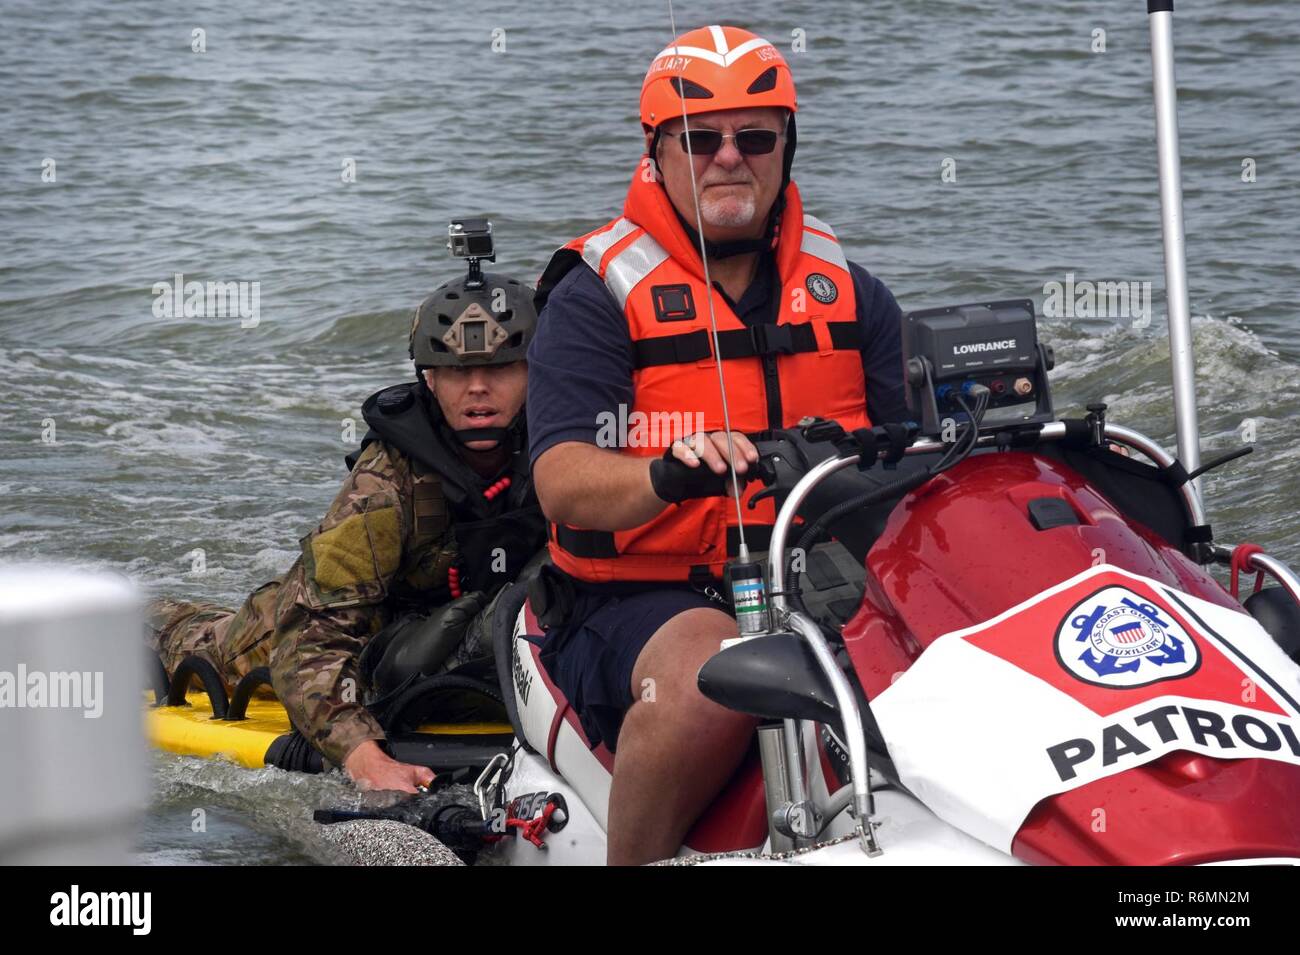 Master Sgt. James Henderson, 181st Weather Flight special operations weatherman, rides with a U.S. Coast Guard Auxiliary member to drop off his parachute gear after a deliberate water drop into Lake Worth in Fort Worth, Texas, May 20, 2017. The mission allowed 12 service members to parachute out of a C-130 Hercules from an altitude of 1000 feet into Lake Worth using MC-6 parachutes. (Texas Air National Guard Stock Photo